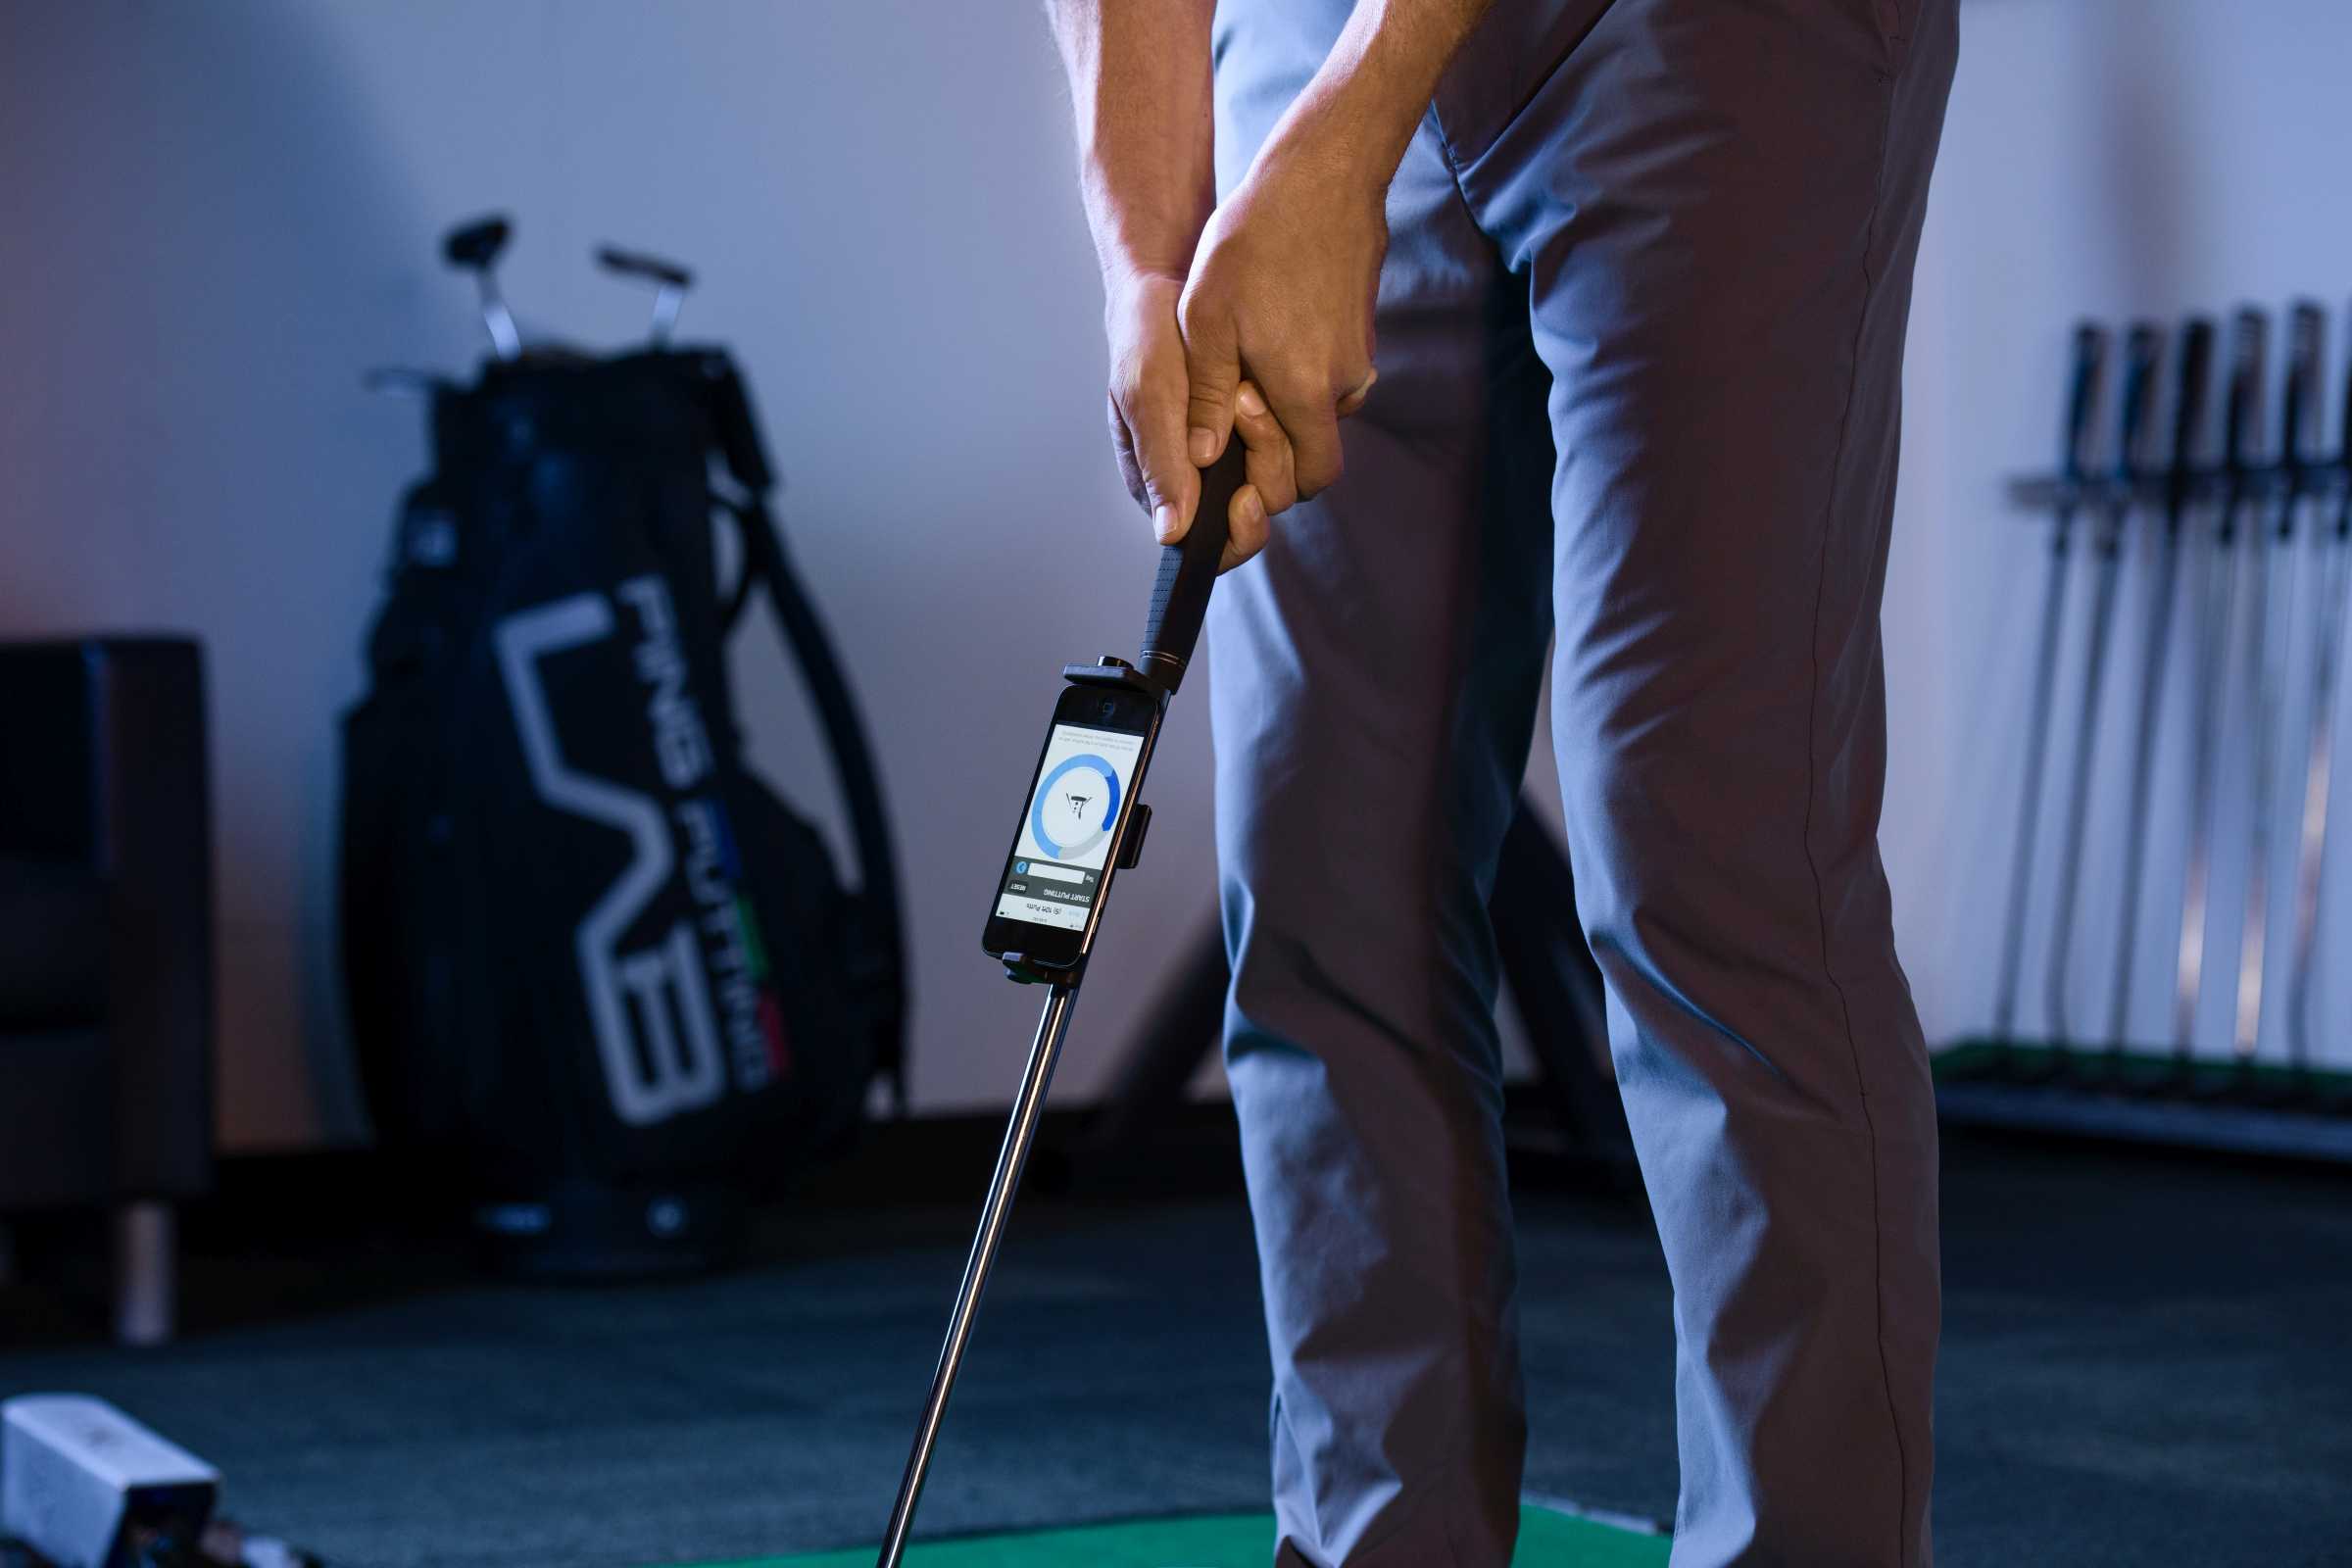 Golfer performing a self-fitting using the PLD iPING app on an Apple iPod attached to his putter